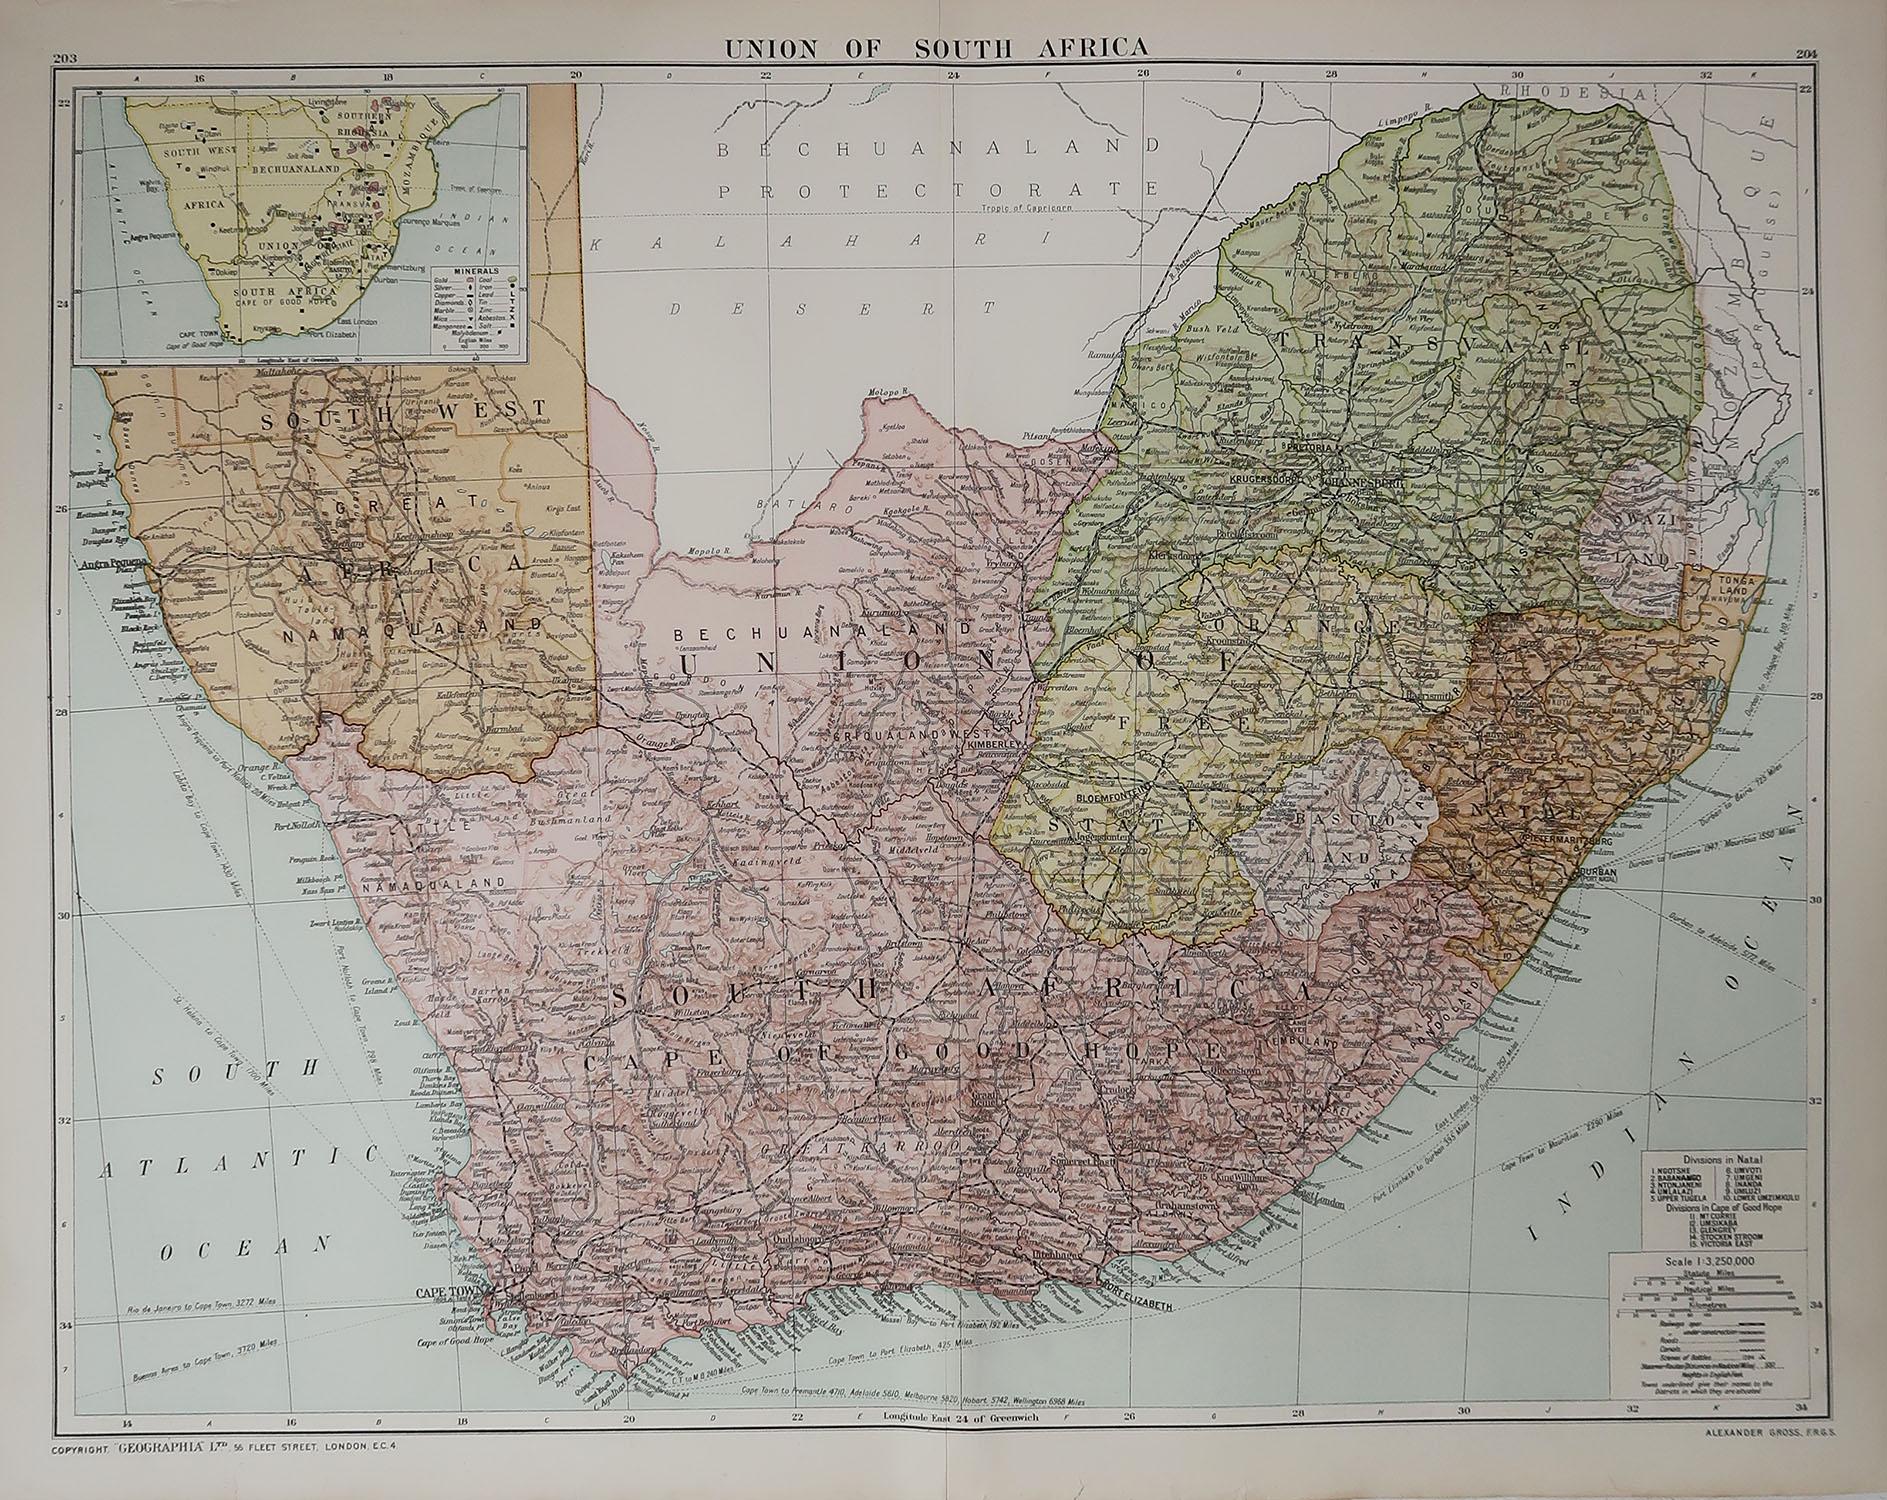 Great map of South Africa

Original color. 

Good condition 

Published by Alexander Gross

Unframed.








